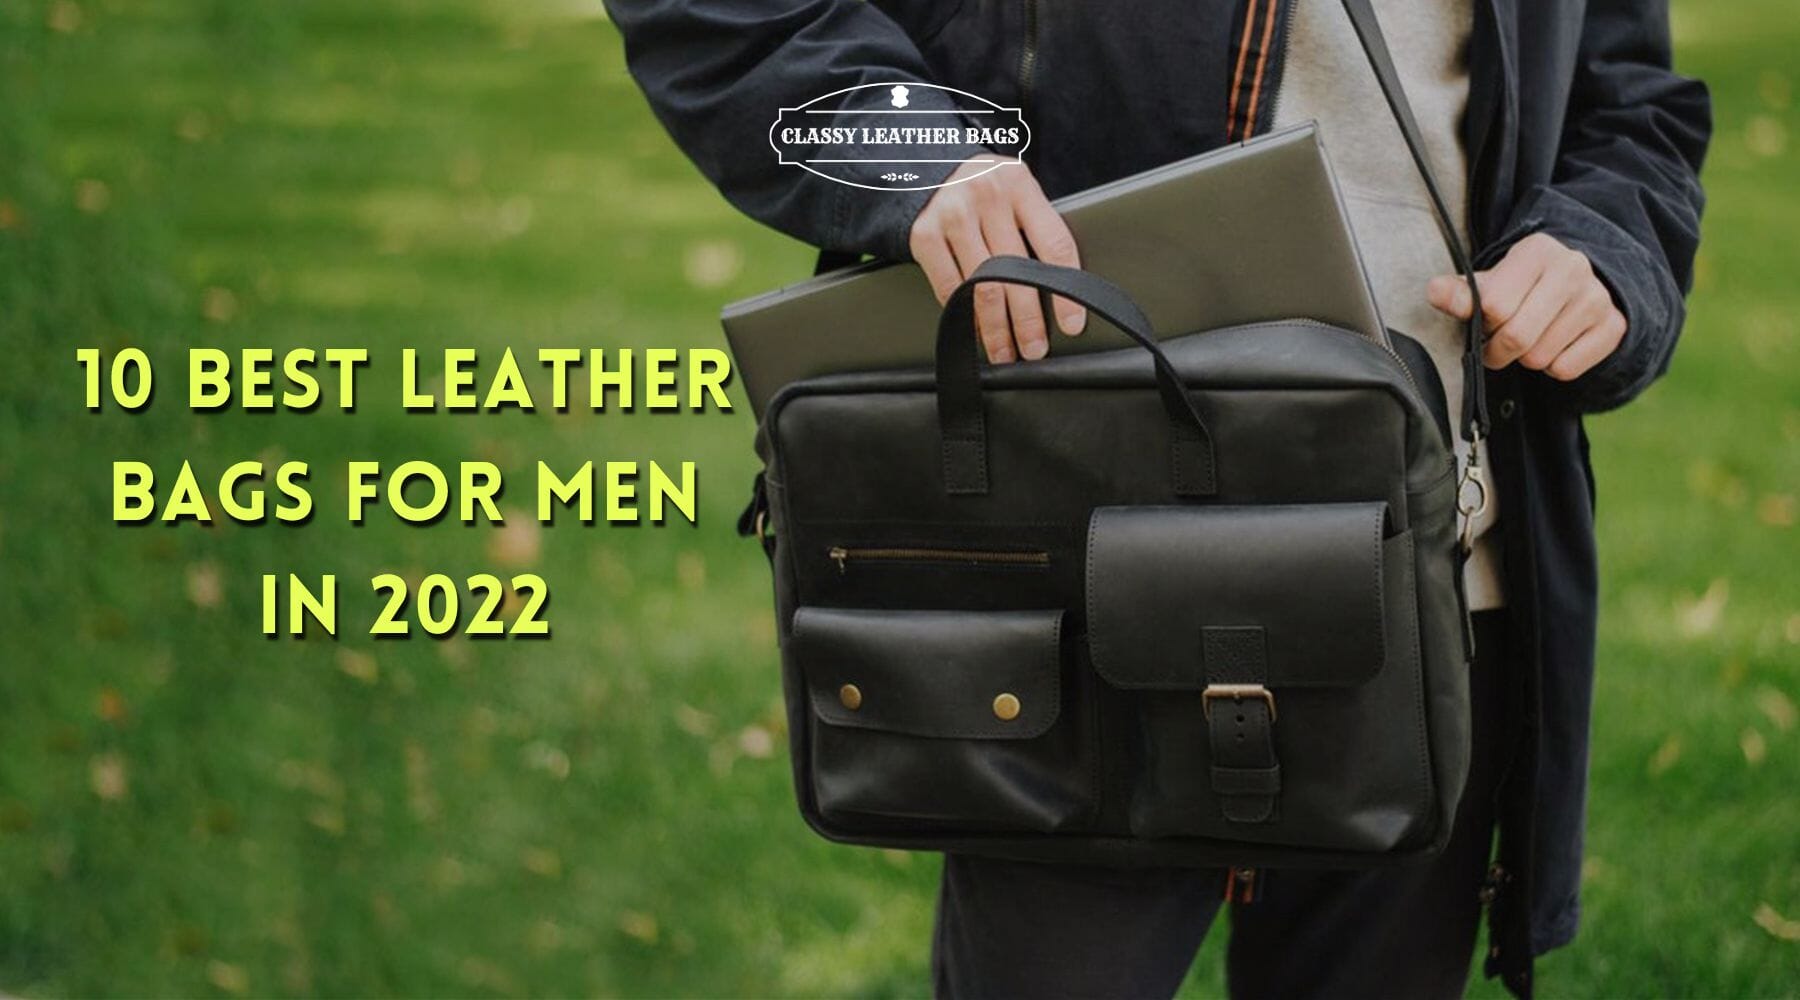 10 Best Leather Bags for Men in 2022